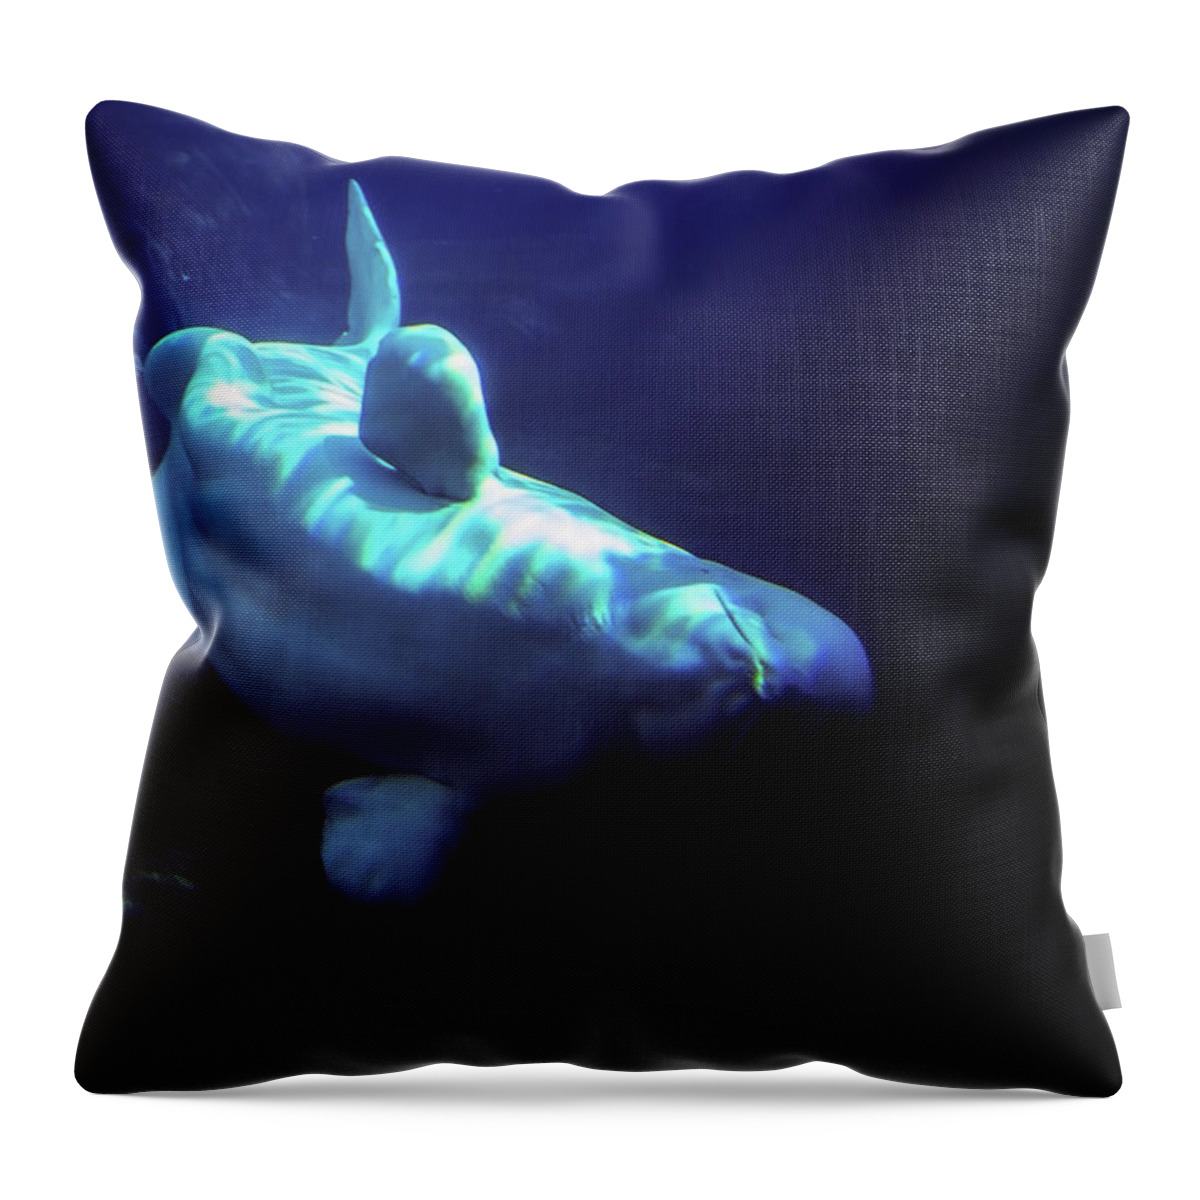 Whale Throw Pillow featuring the photograph Blue Beluga by Anthony Jones